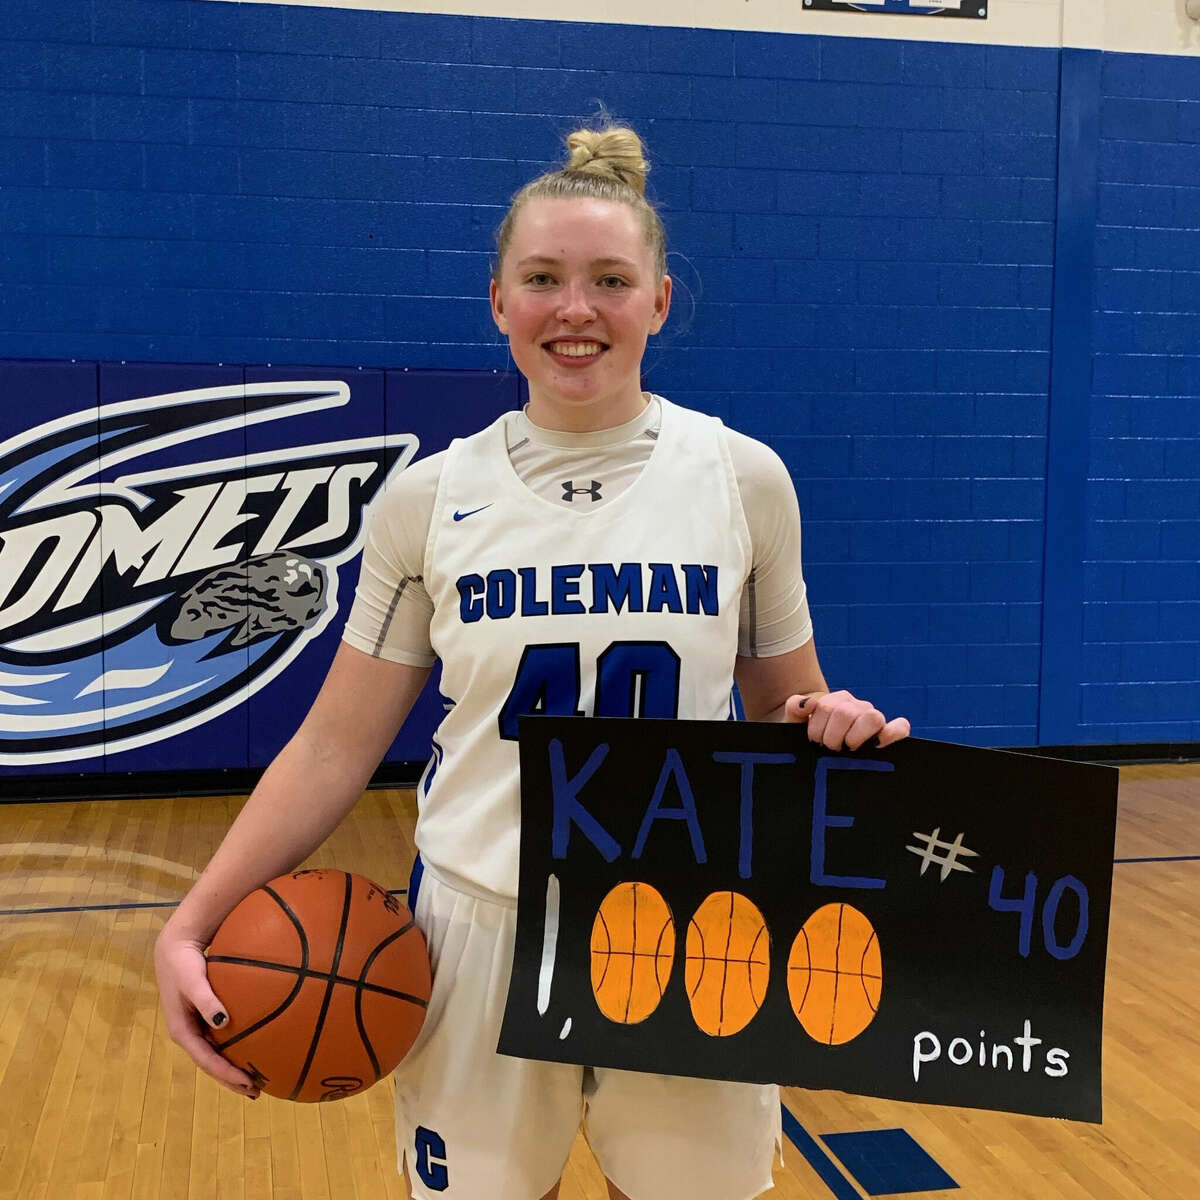 Coleman's Katelyn Pnacek poses with a commemorative sign after reaching the 1,000-point mark for her career in Thursday's win over Breckenridge, Jan. 27, 2022. Pnacek had 17 points and 10 rebounds Friday in her final game, a district final loss to Mount Pleasant Sacred Heart.